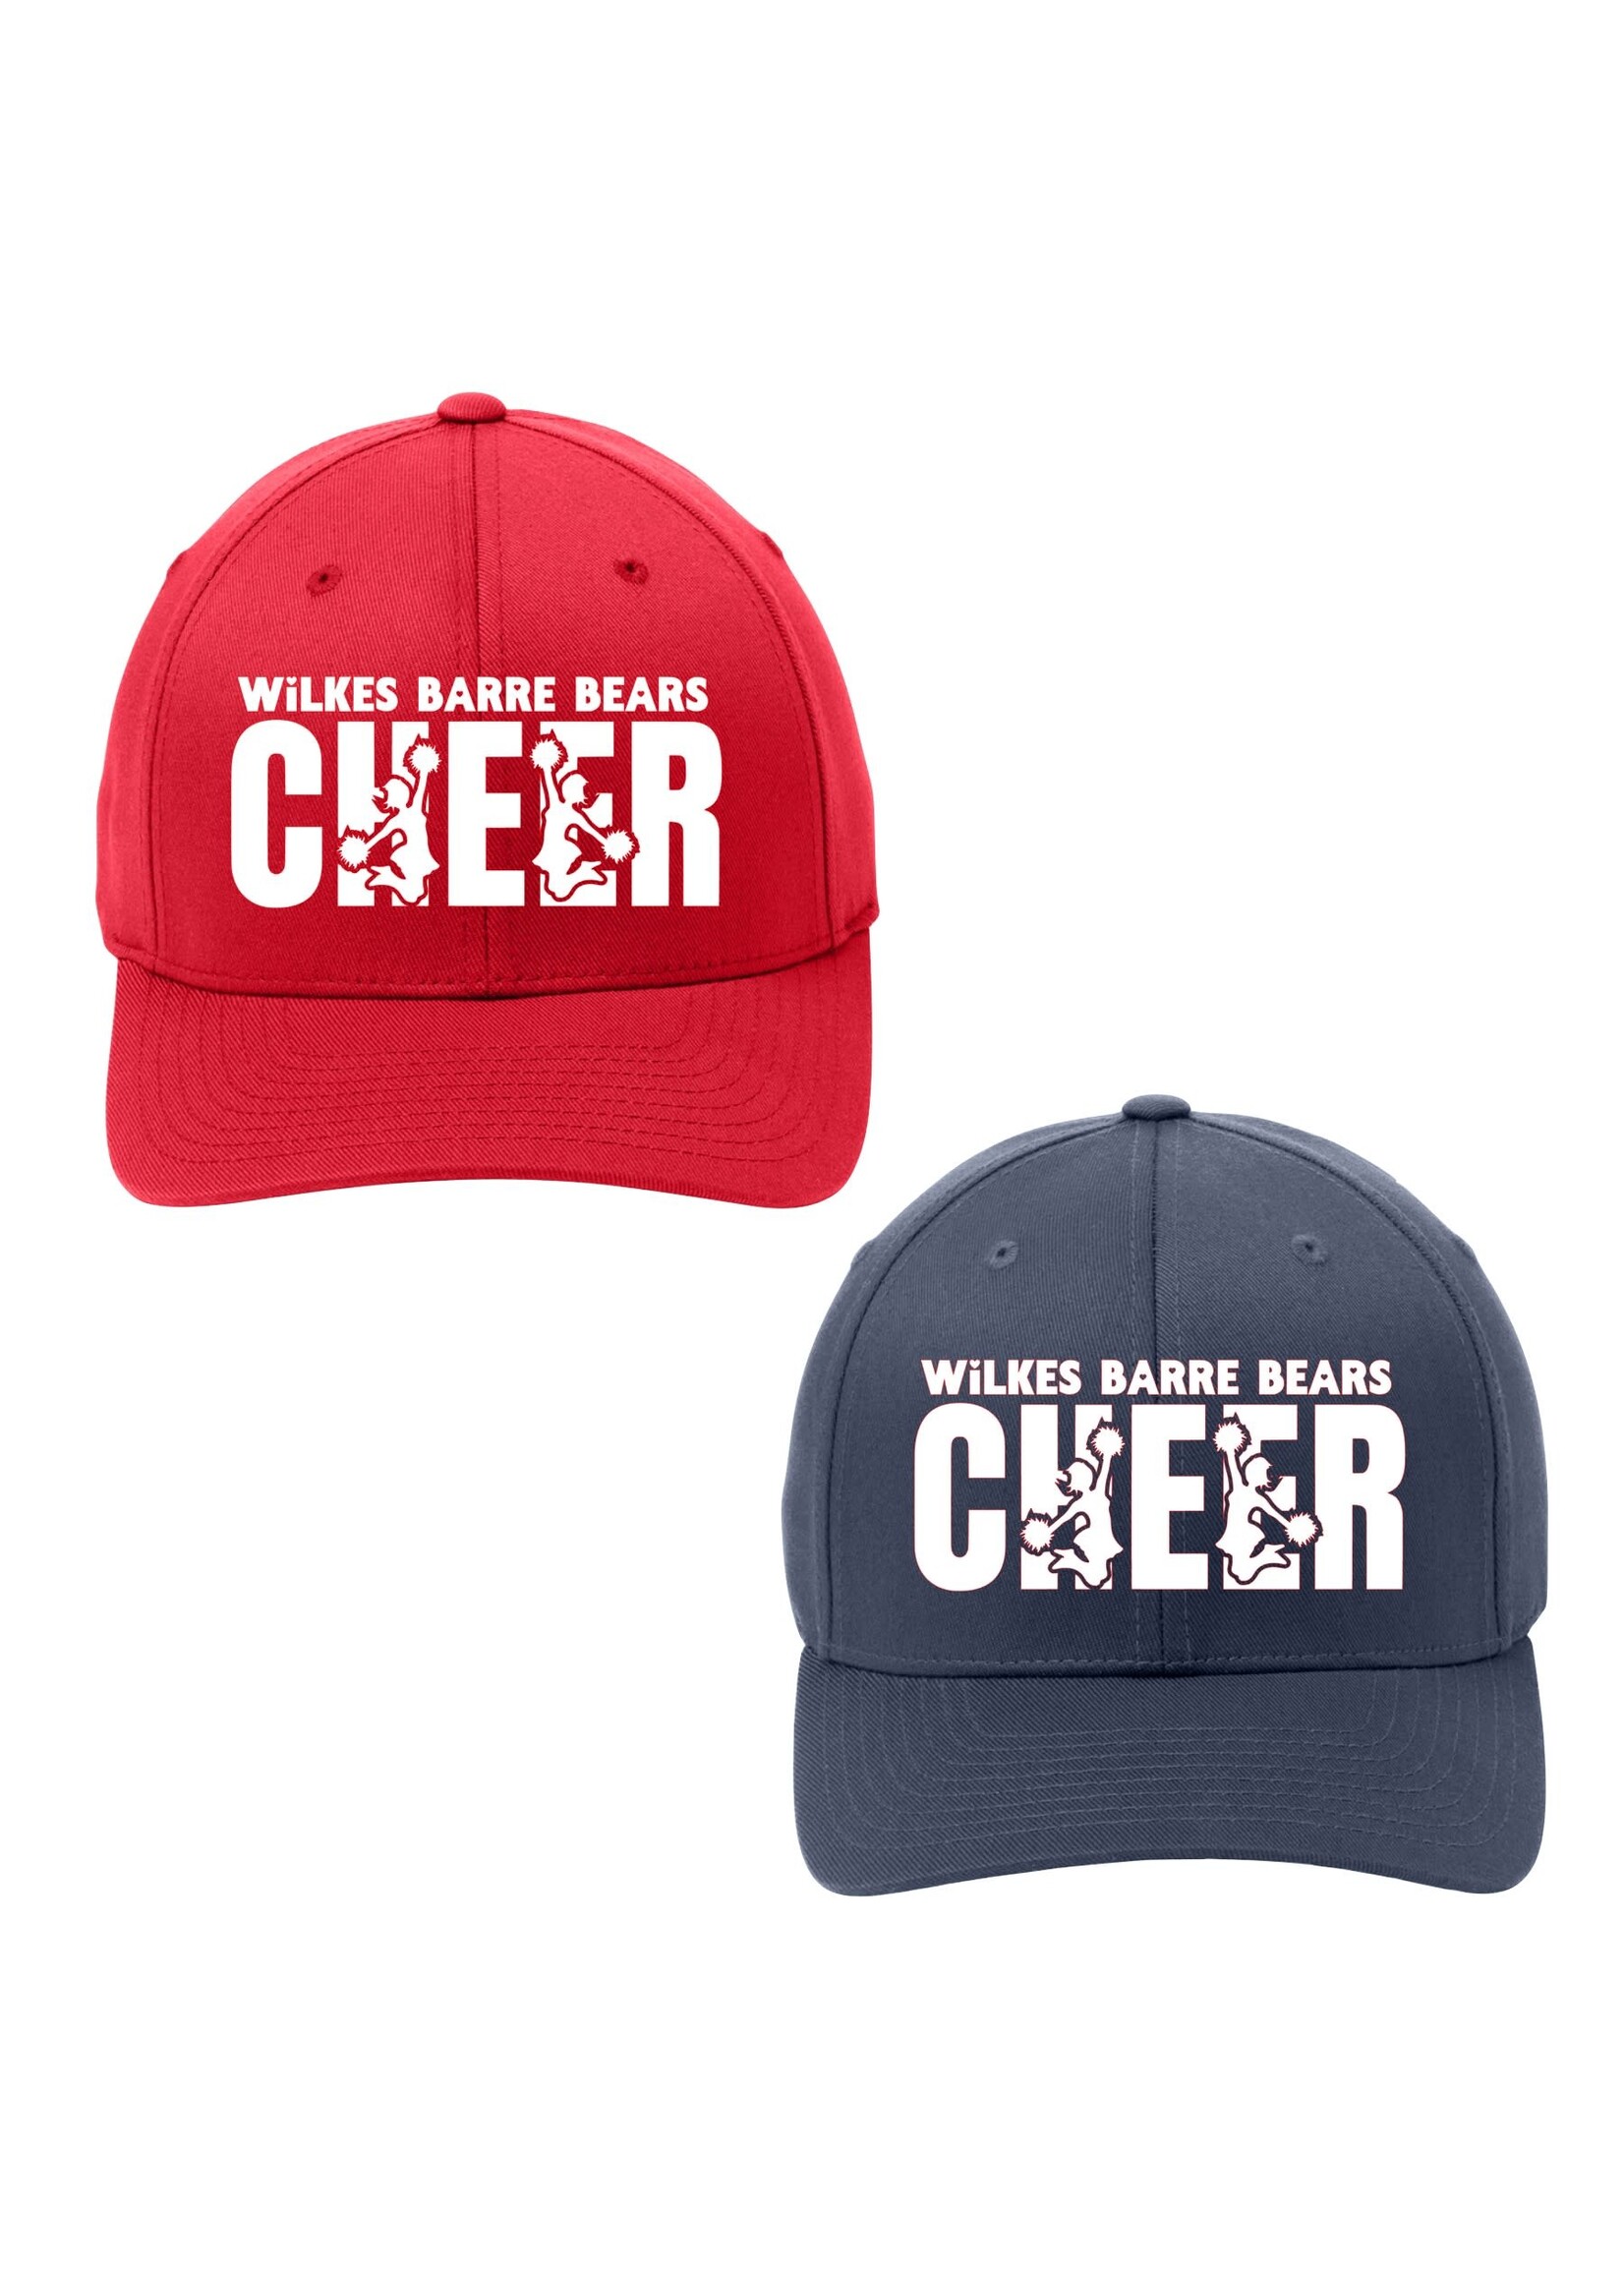 Bears Cheer fitted hat